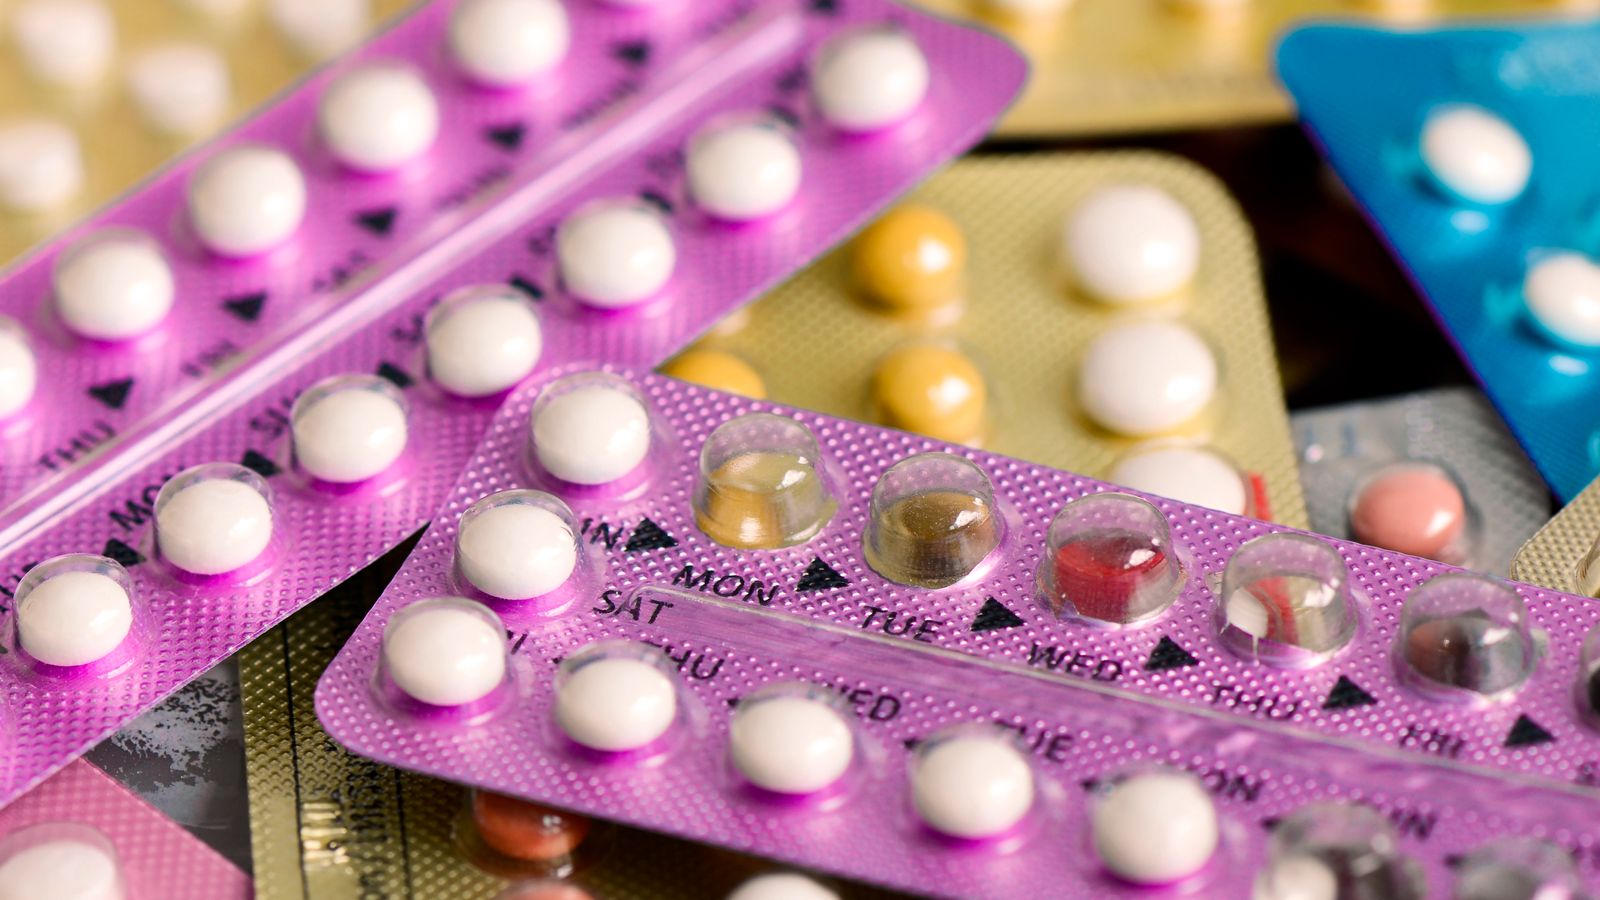 Using any type of hormonal contraceptive could increase the risk of women getting breast cancer, new study suggests